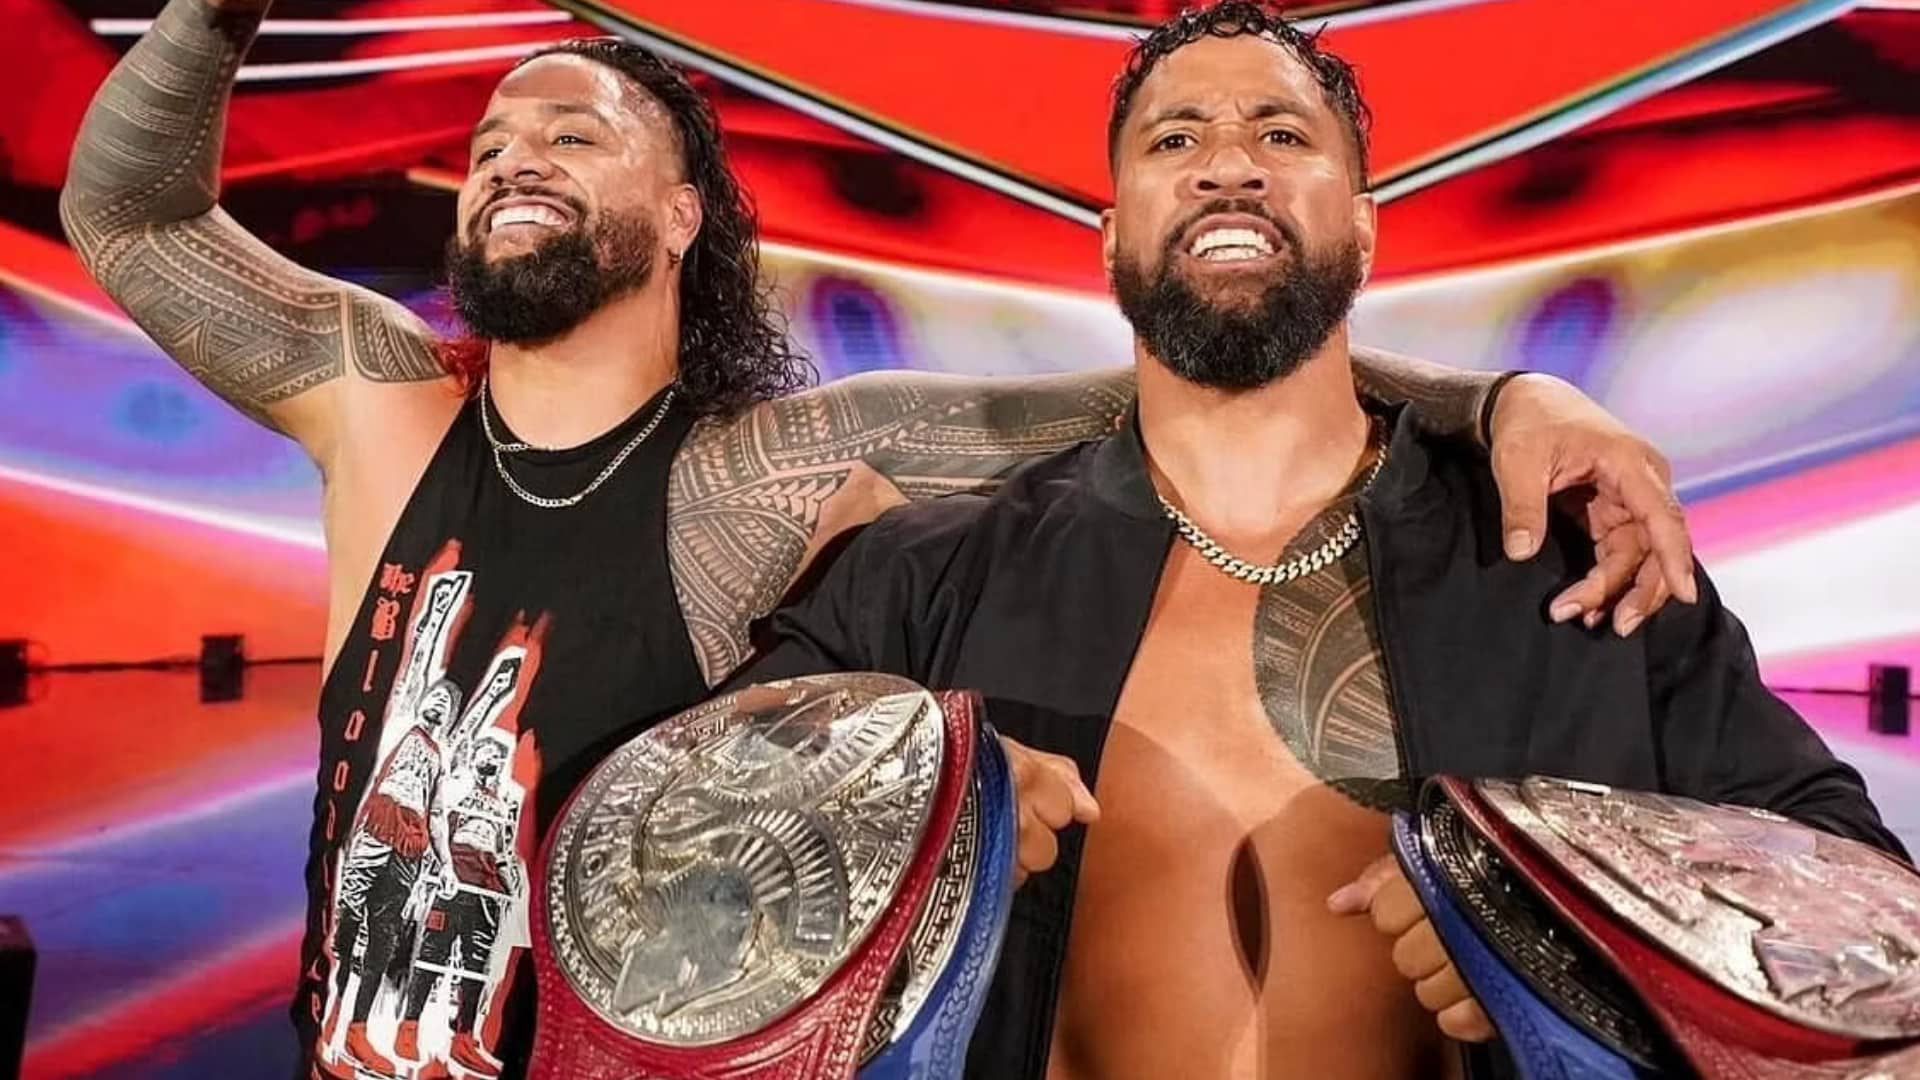 The Usos have maintained a dominance over the tag team division